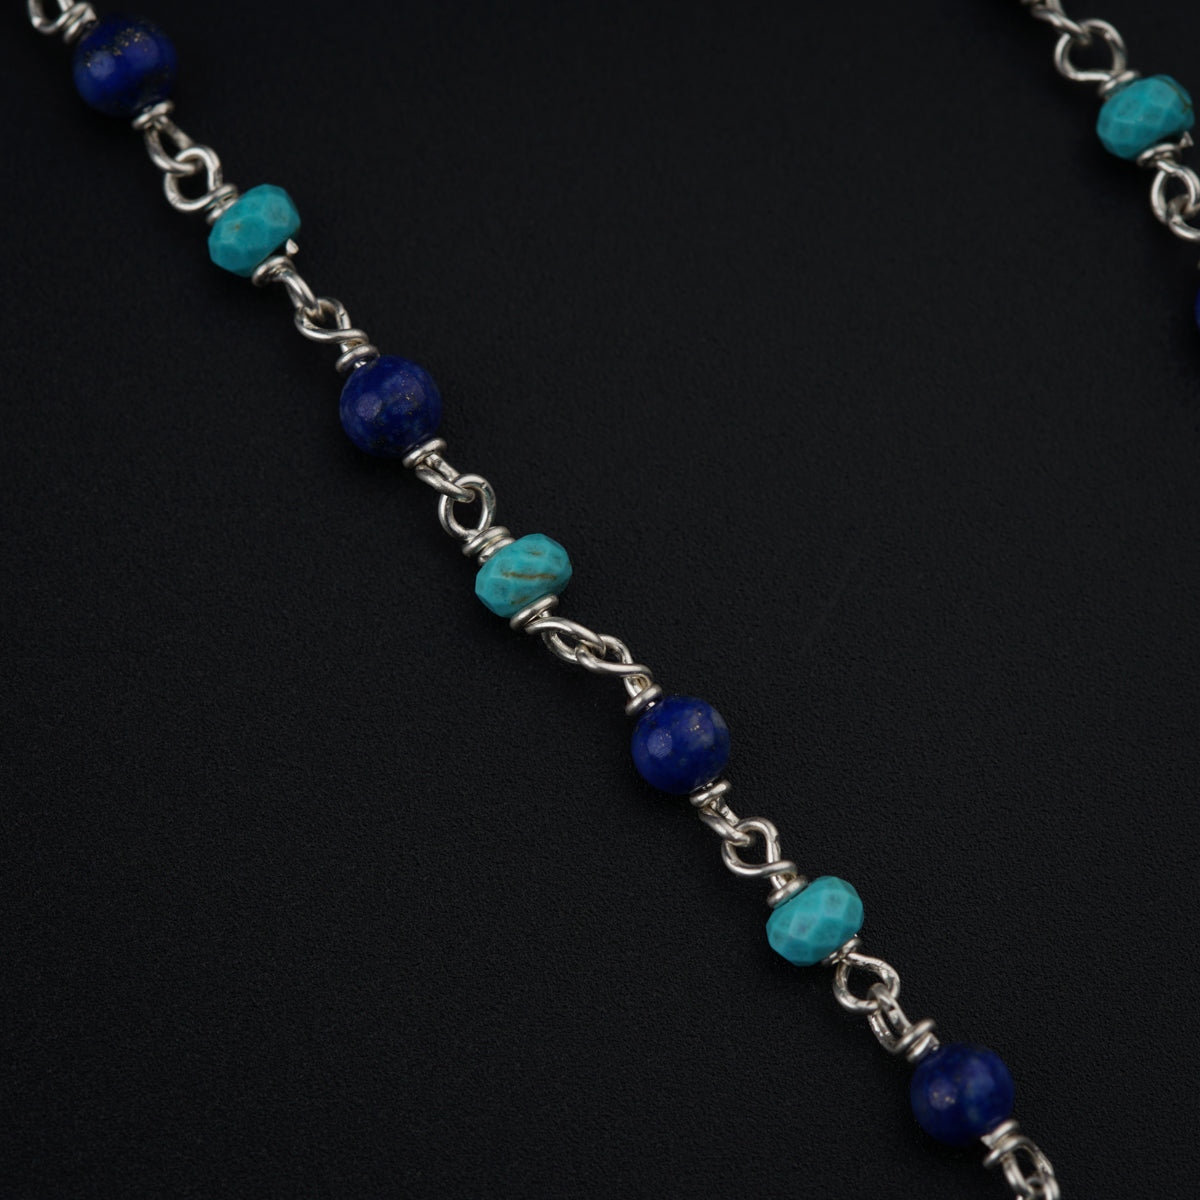 Antique Silver Necklace with Lapis and Turquoise Beads